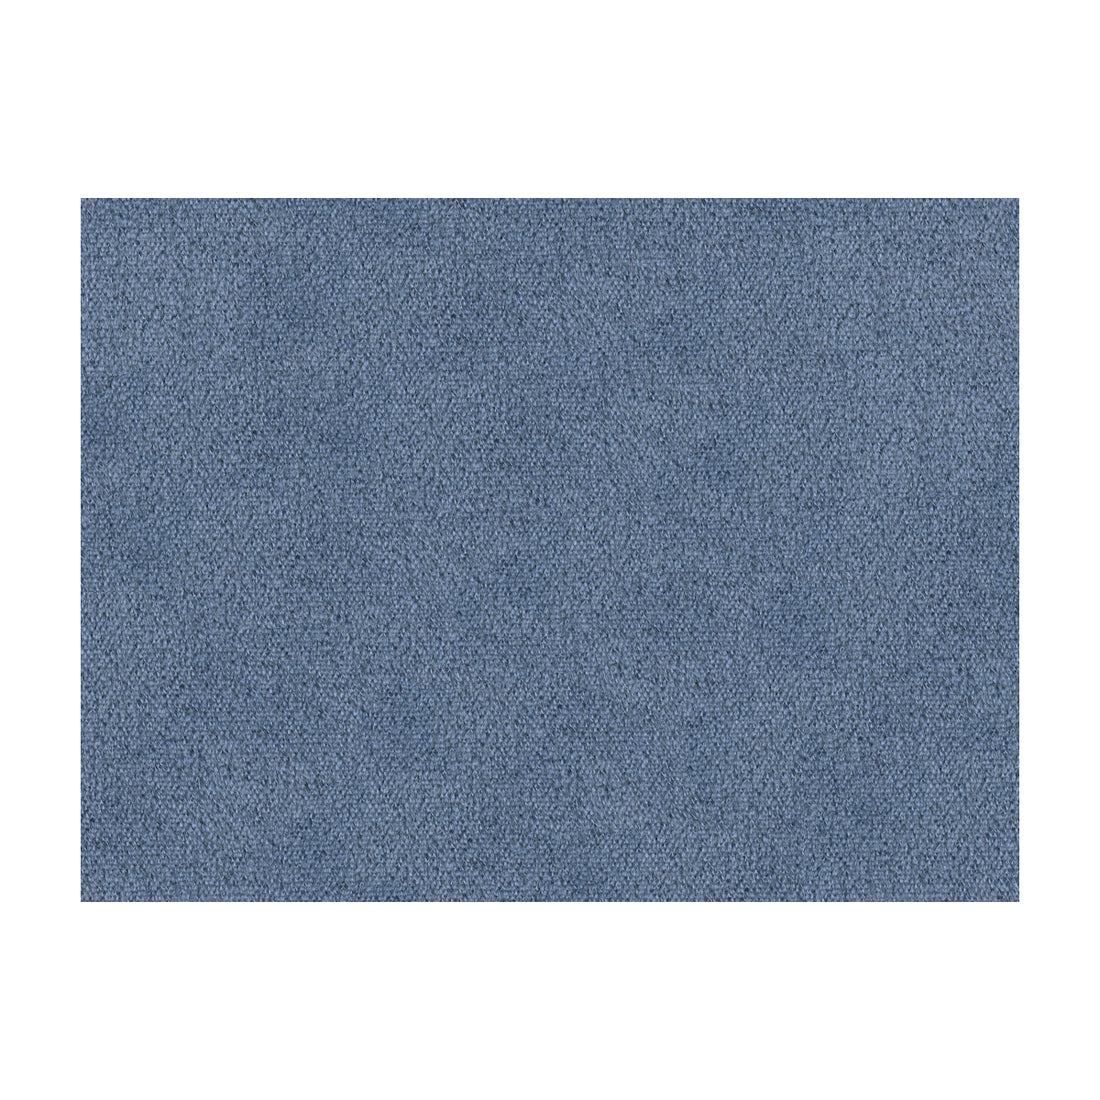 Autun Mohair Velvet fabric in periwinkle color - pattern BR-89778.234.0 - by Brunschwig &amp; Fils